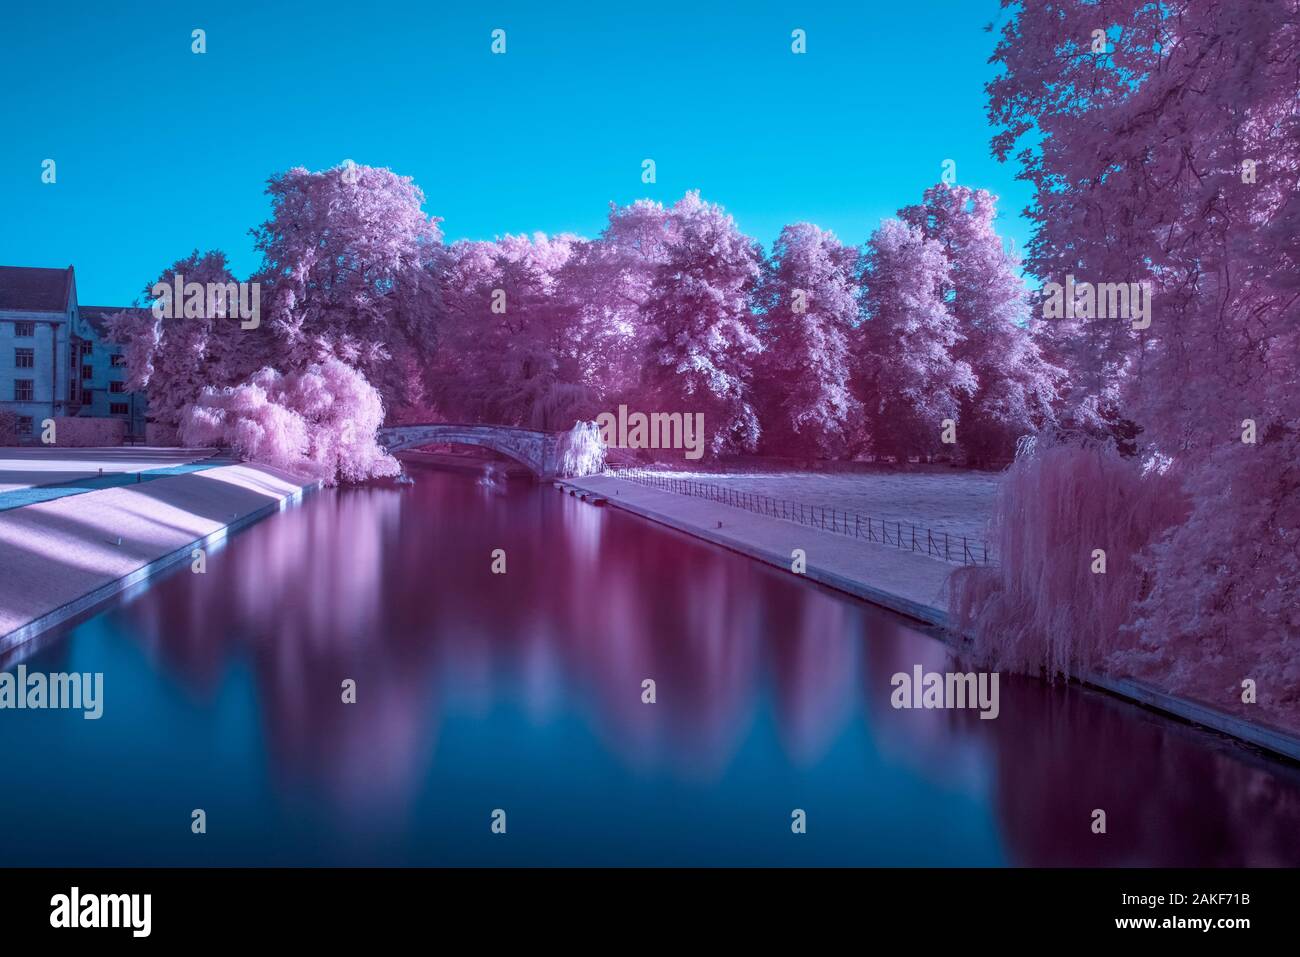 UK, England, Cambridgeshire, Cambridge, The Backs, The River Cam and King's College Bridge, Infra Red image Stock Photo